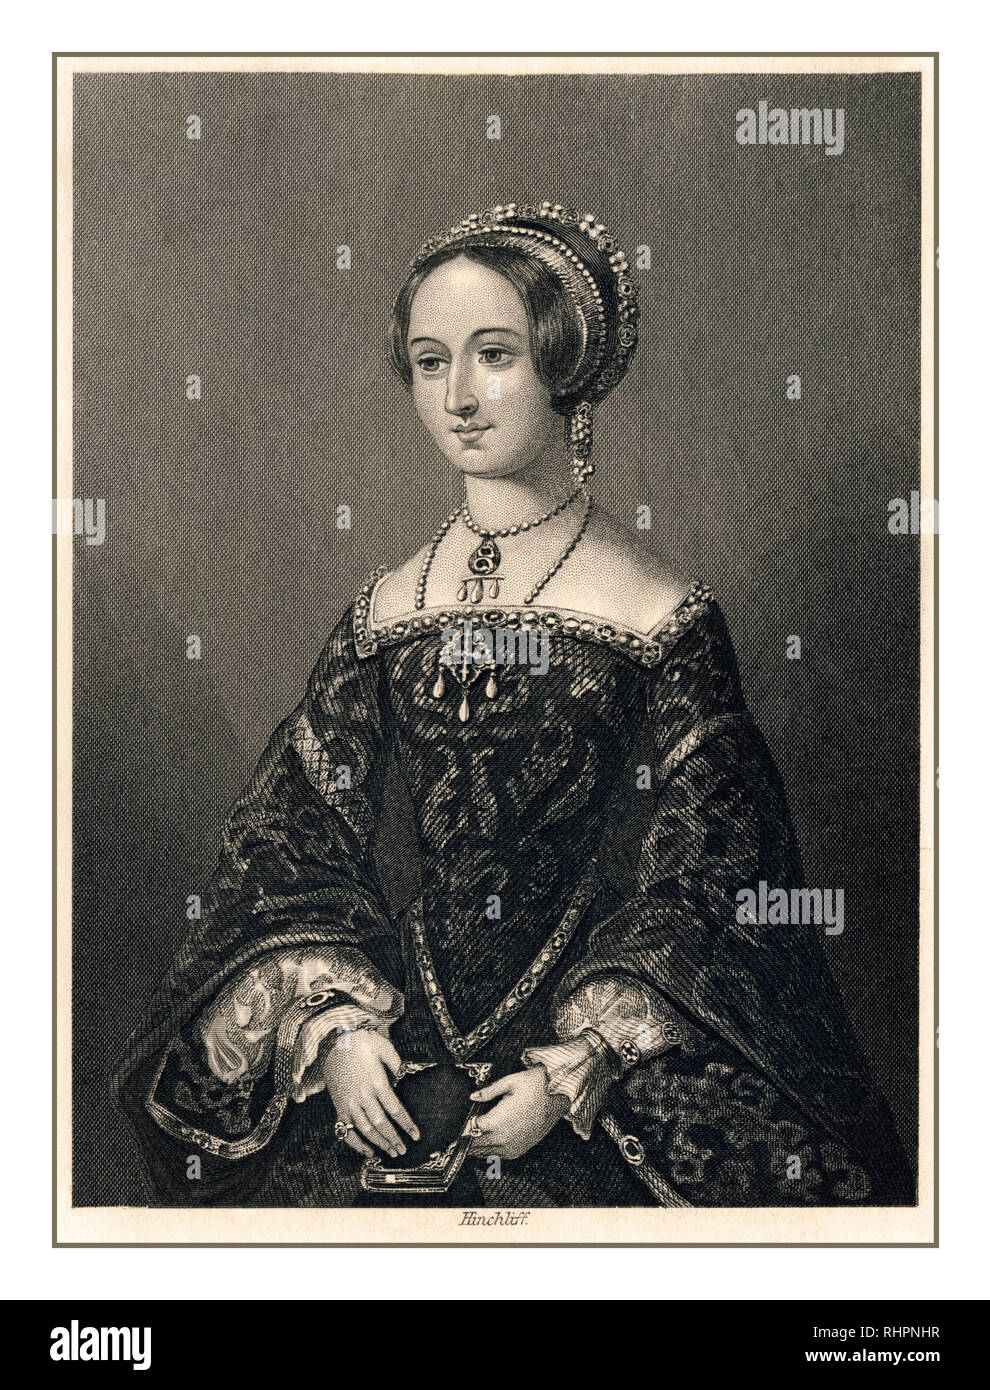 Marguerite, Queen of Navarre, in an engraving by Hinchliff. From an 1864 edition of the Heptameron. 'The Heptameron of Margaret, Queen of Navarre. Translated from the French, With a Memoir of the Author by Walter K. Kelly.' (1864) London, Henry G. Bohn, York Street, Covent Garden. Author John James Hinchliff (1805-1875) Stock Photo